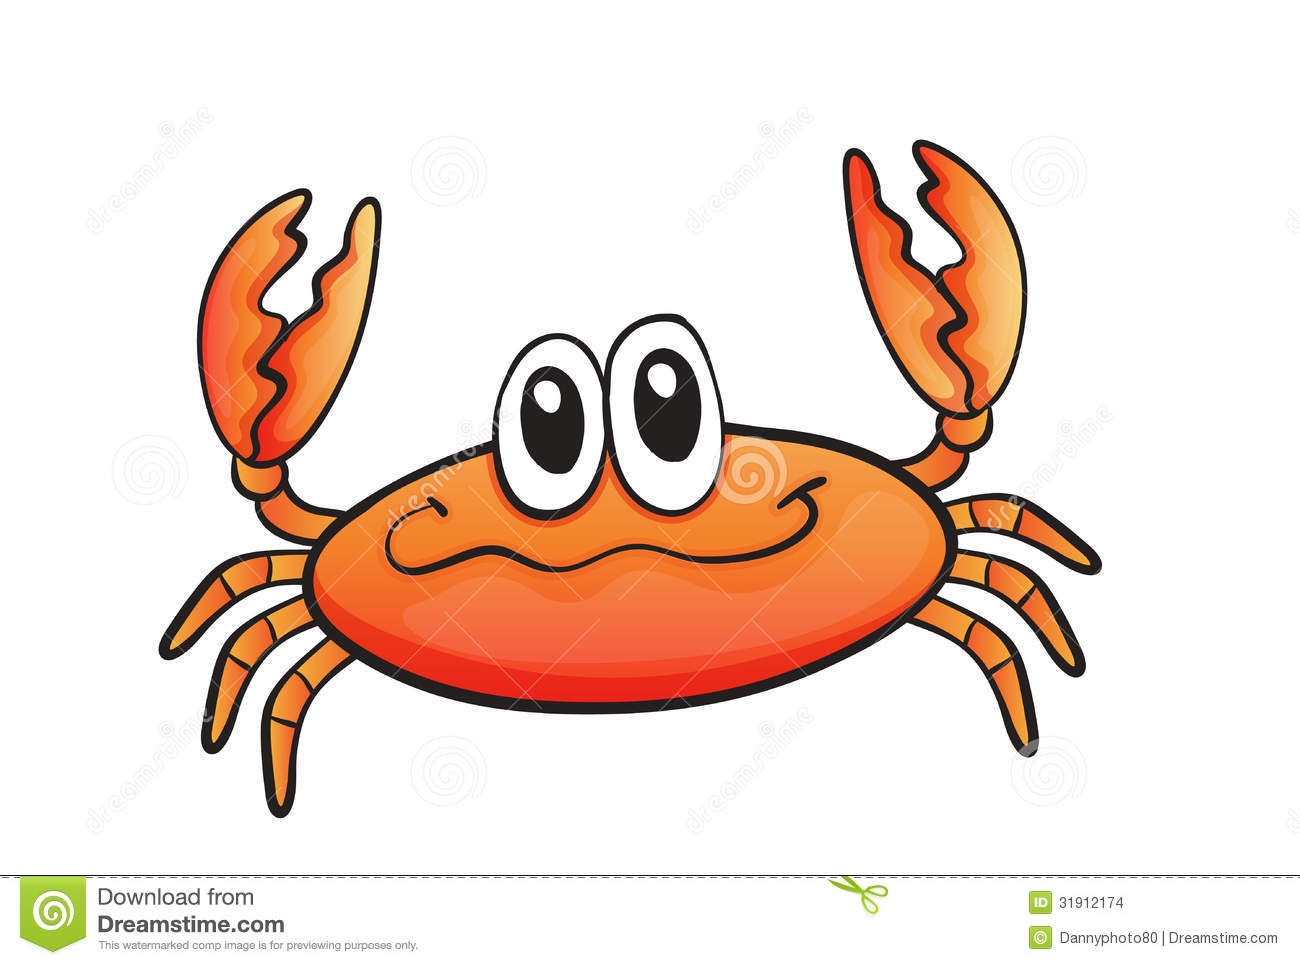 crab images image 34993